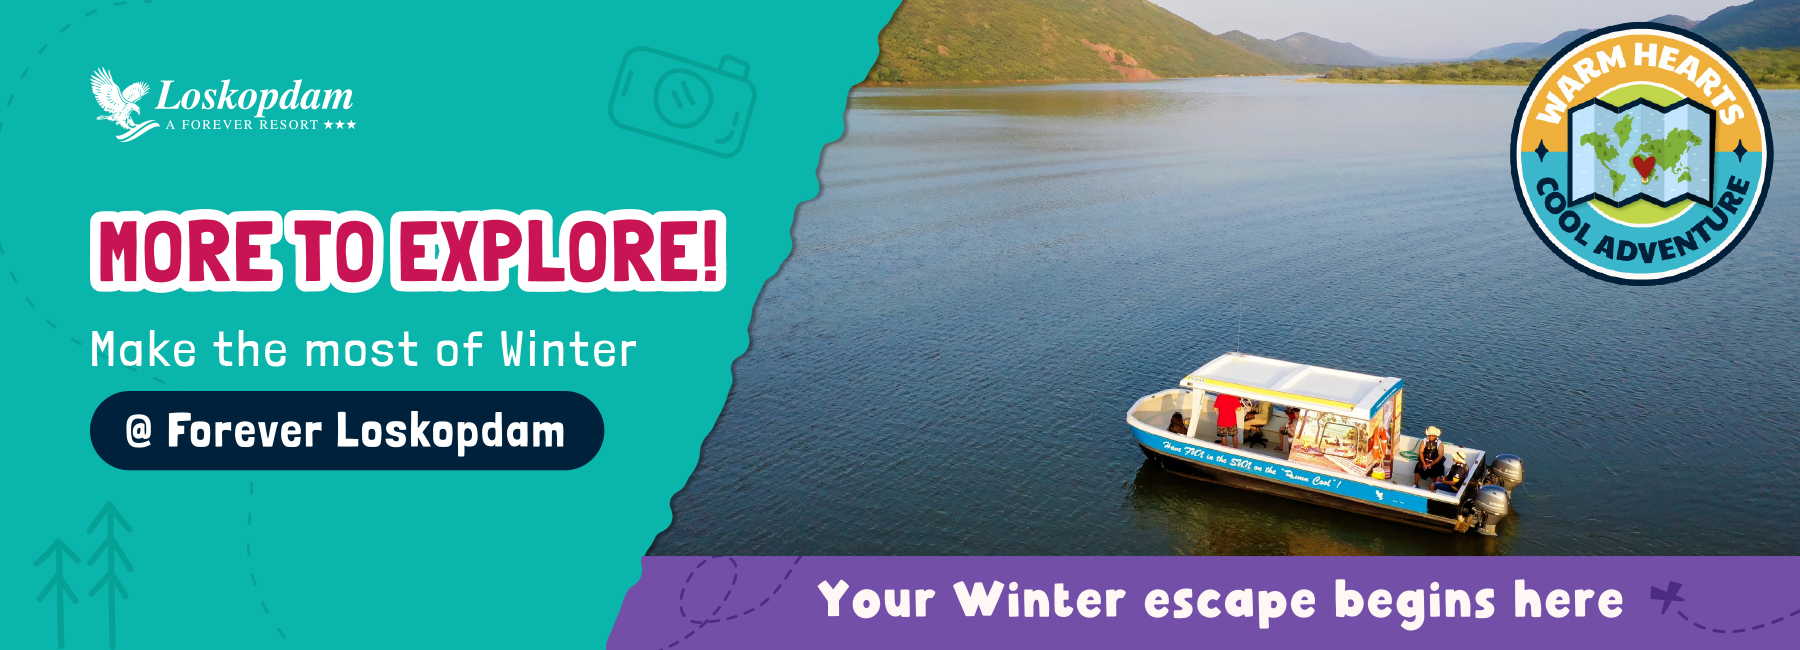 More to explore! Make the most of Winter at Loskop Dam